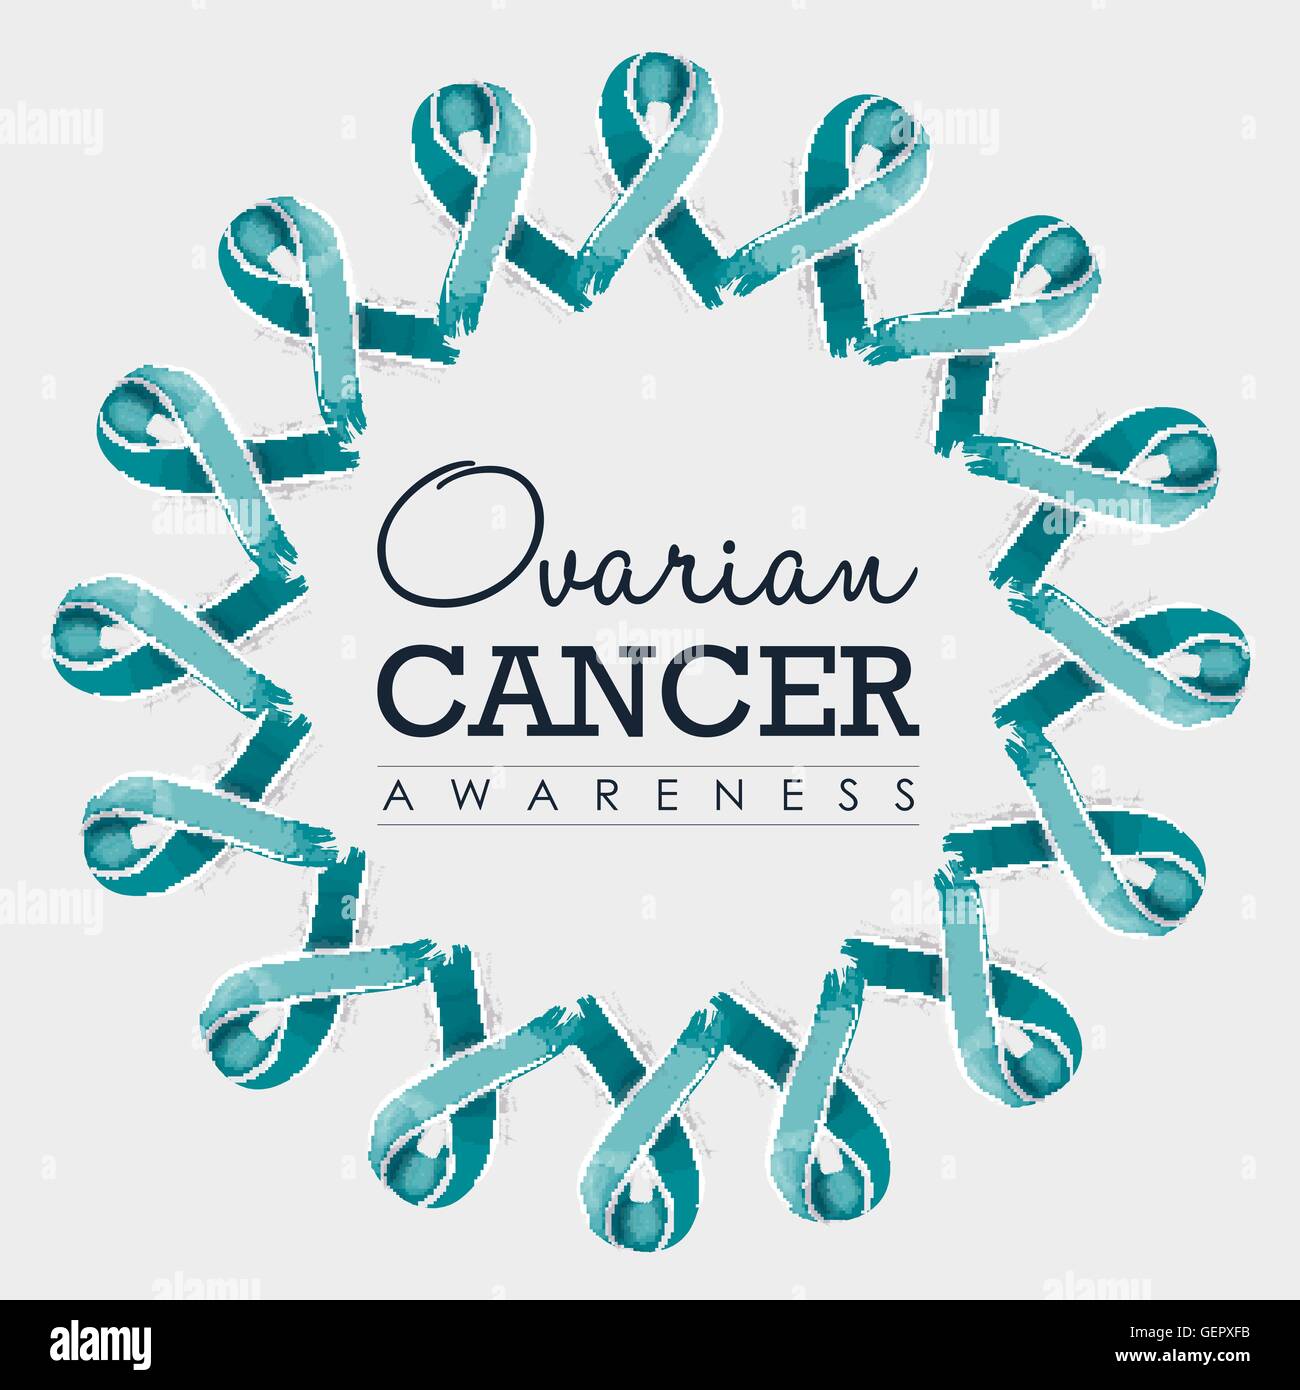 Ovarian cancer awareness typography design with mandala made of blue teal hand drawn ribbons. EPS10 vector. Stock Vector